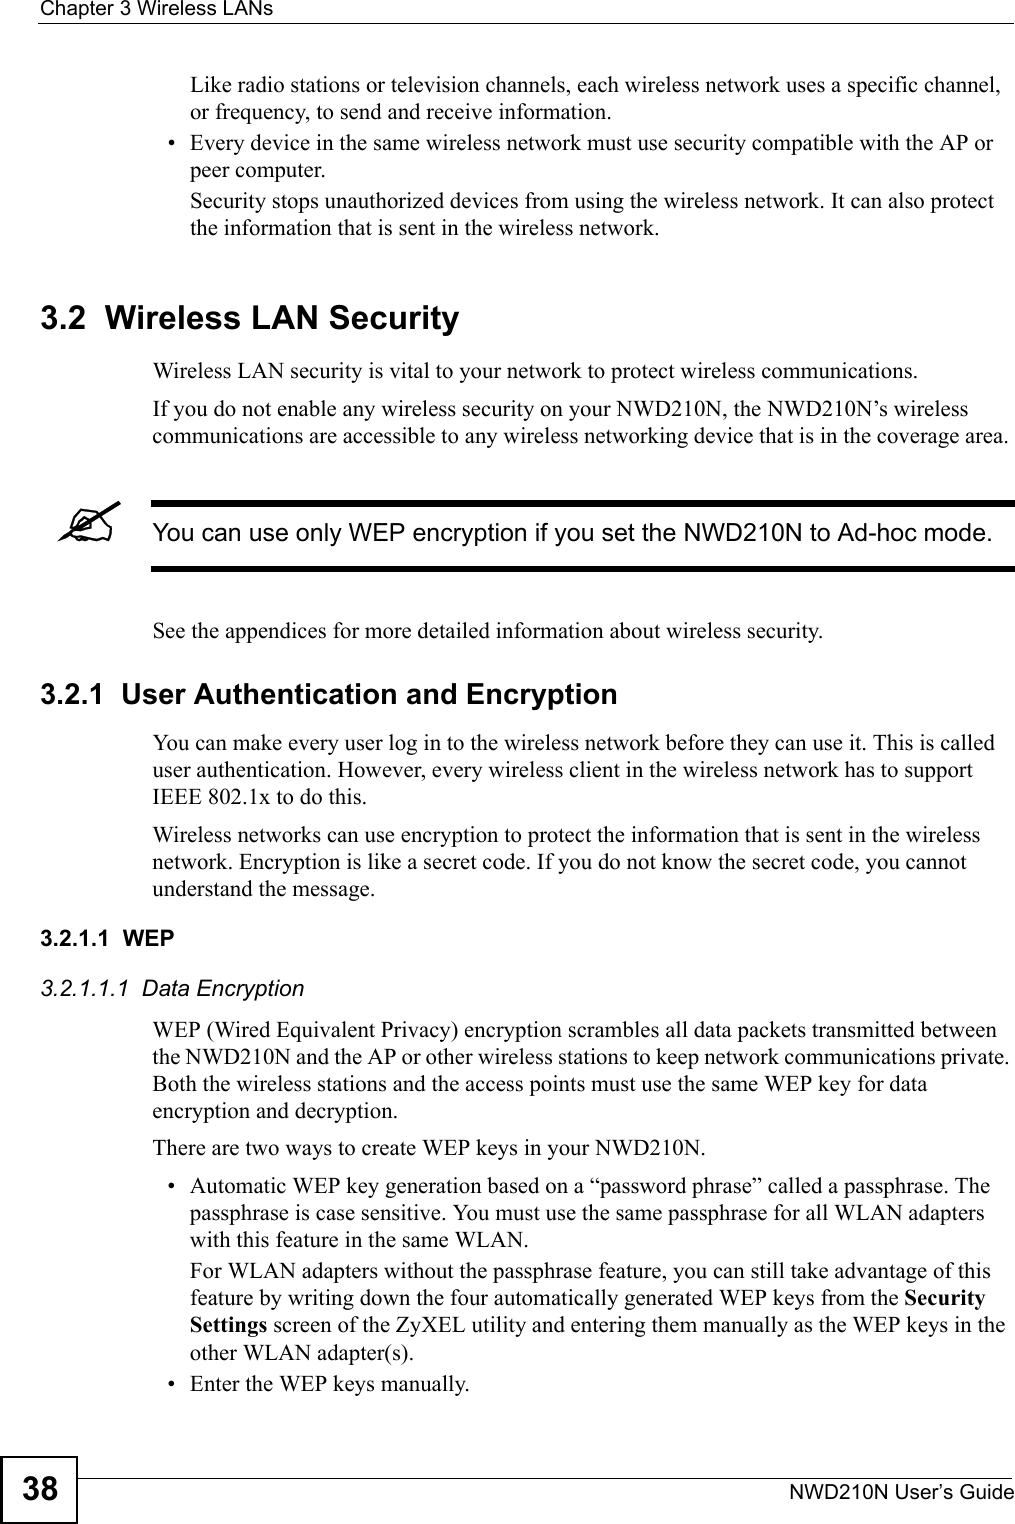 Chapter 3 Wireless LANsNWD210N User’s Guide38Like radio stations or television channels, each wireless network uses a specific channel, or frequency, to send and receive information.• Every device in the same wireless network must use security compatible with the AP or peer computer.Security stops unauthorized devices from using the wireless network. It can also protect the information that is sent in the wireless network.3.2  Wireless LAN Security Wireless LAN security is vital to your network to protect wireless communications.If you do not enable any wireless security on your NWD210N, the NWD210N’s wireless communications are accessible to any wireless networking device that is in the coverage area. &quot;You can use only WEP encryption if you set the NWD210N to Ad-hoc mode.See the appendices for more detailed information about wireless security.3.2.1  User Authentication and EncryptionYou can make every user log in to the wireless network before they can use it. This is called user authentication. However, every wireless client in the wireless network has to support IEEE 802.1x to do this.Wireless networks can use encryption to protect the information that is sent in the wireless network. Encryption is like a secret code. If you do not know the secret code, you cannot understand the message.3.2.1.1  WEP3.2.1.1.1  Data Encryption WEP (Wired Equivalent Privacy) encryption scrambles all data packets transmitted between the NWD210N and the AP or other wireless stations to keep network communications private. Both the wireless stations and the access points must use the same WEP key for data encryption and decryption.There are two ways to create WEP keys in your NWD210N.• Automatic WEP key generation based on a “password phrase” called a passphrase. The passphrase is case sensitive. You must use the same passphrase for all WLAN adapters with this feature in the same WLAN.For WLAN adapters without the passphrase feature, you can still take advantage of this feature by writing down the four automatically generated WEP keys from the Security Settings screen of the ZyXEL utility and entering them manually as the WEP keys in the other WLAN adapter(s).• Enter the WEP keys manually.